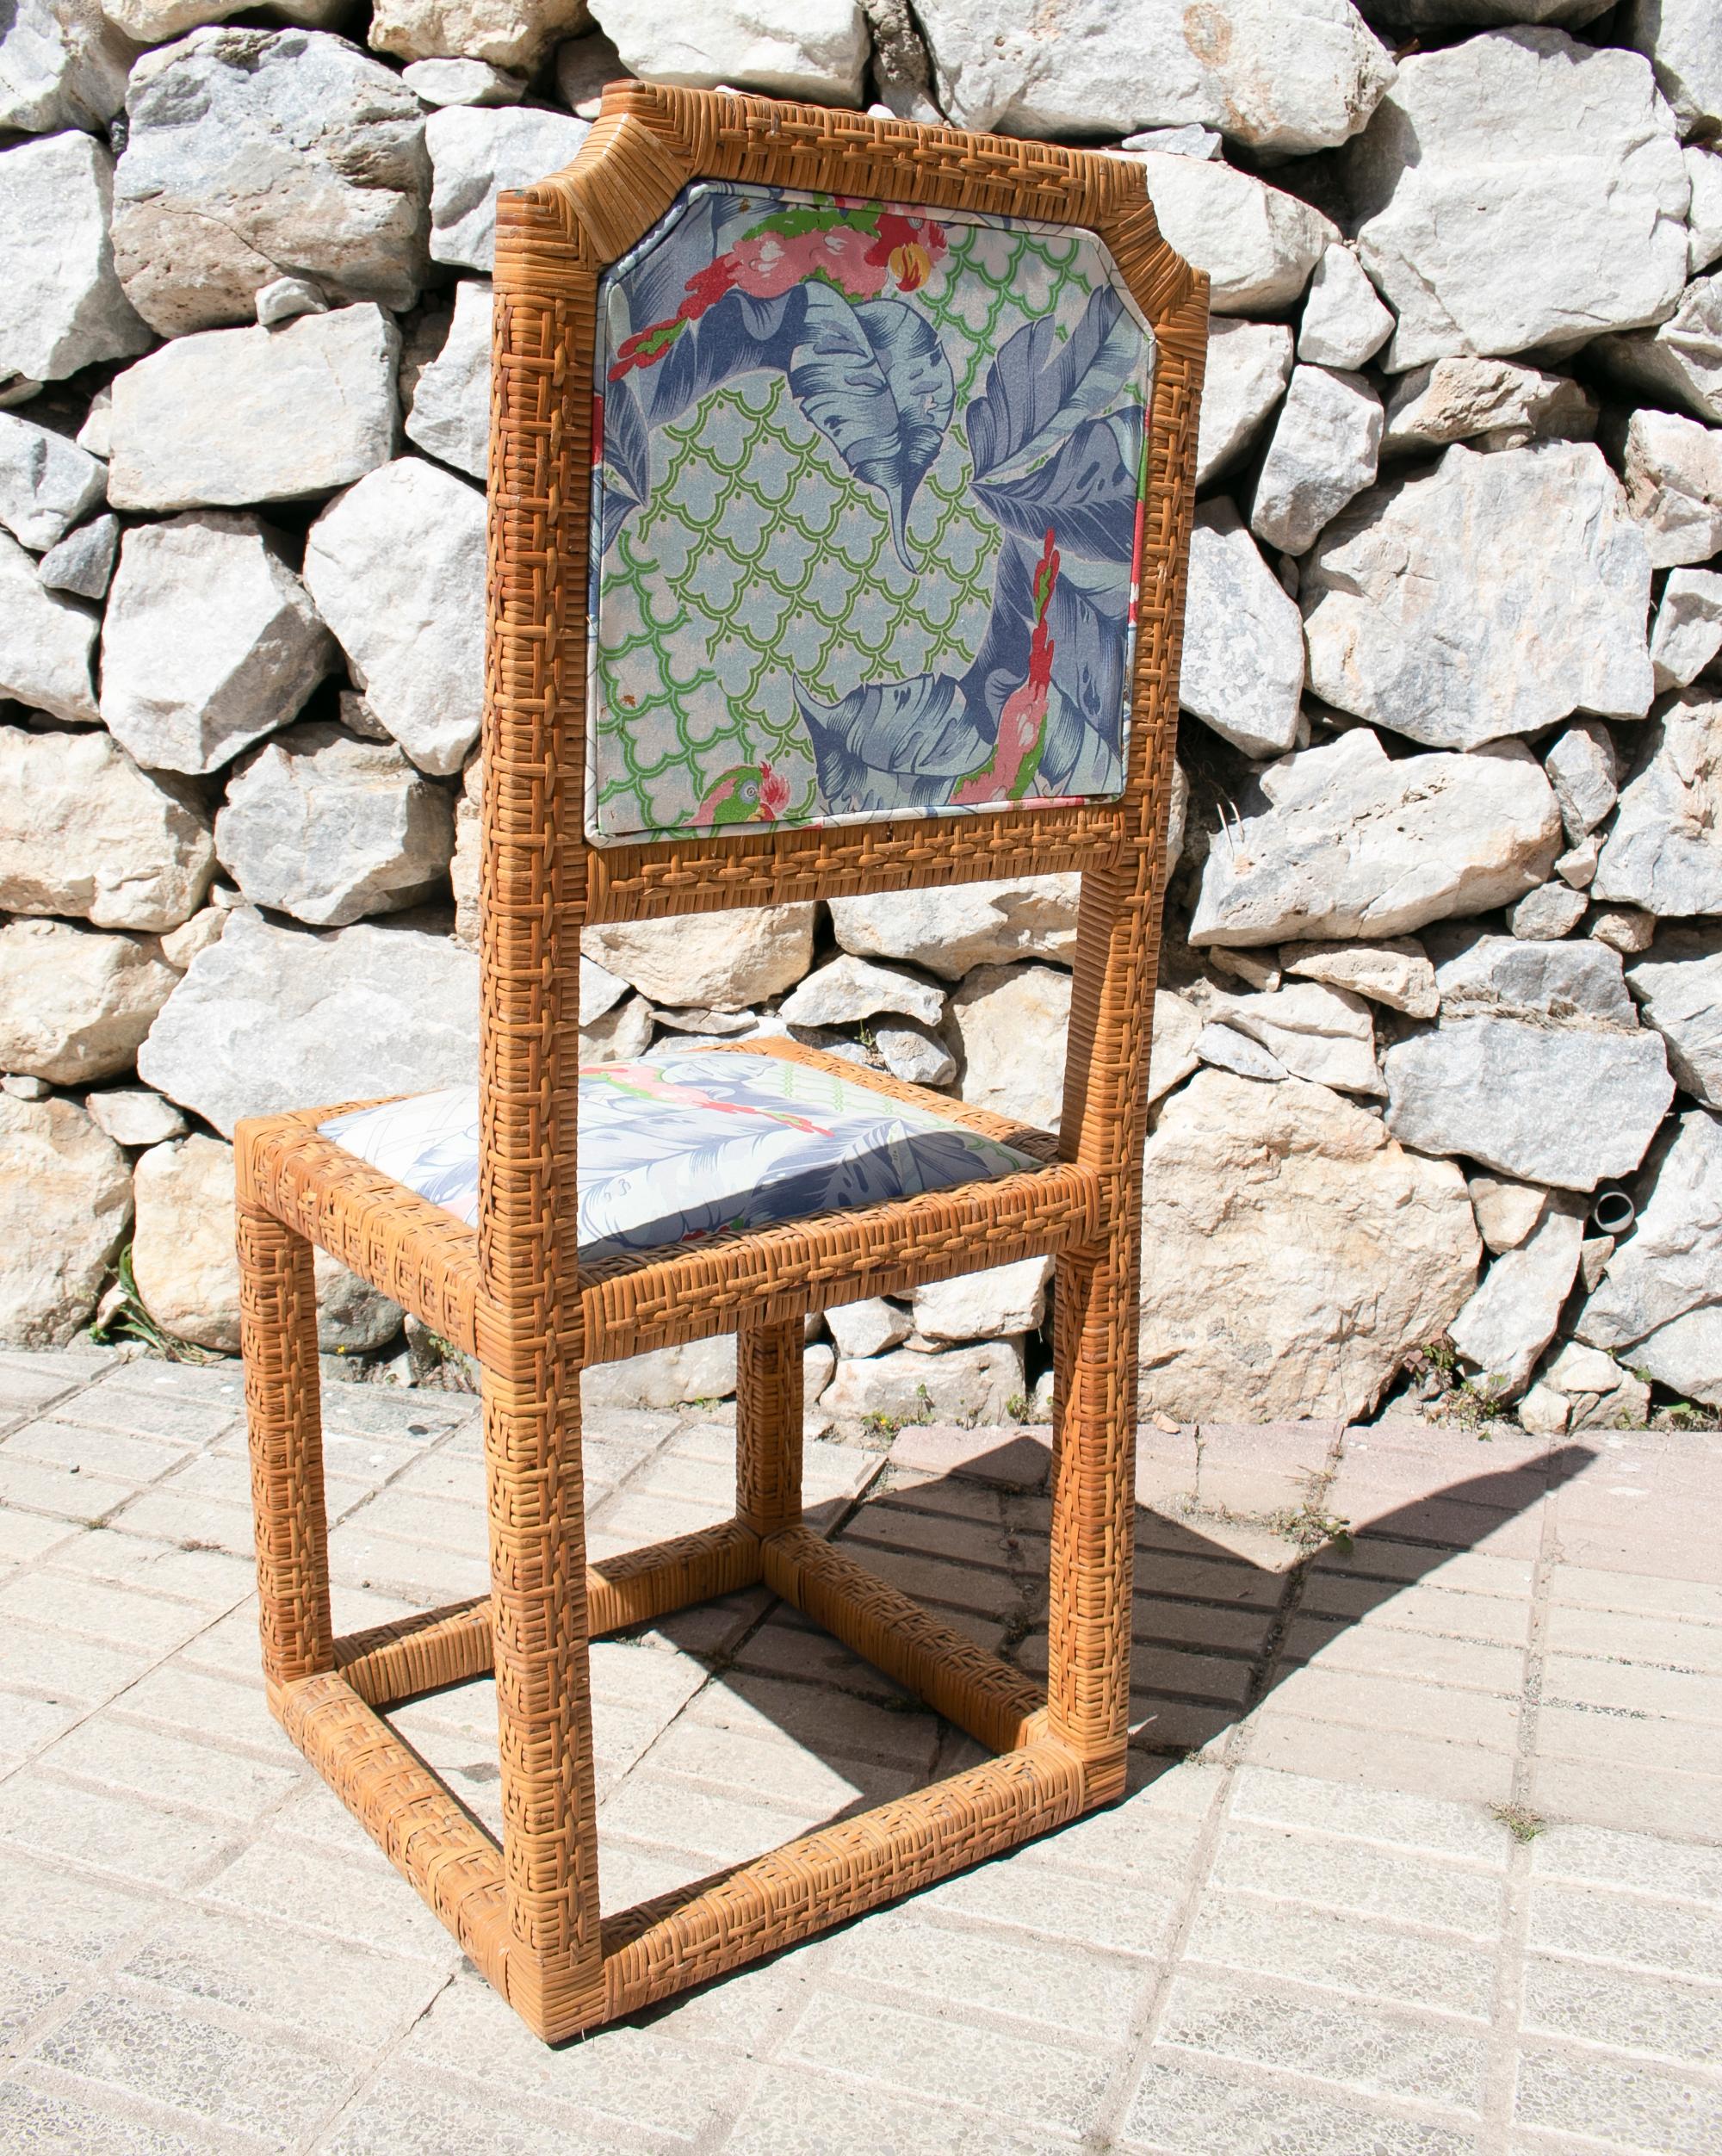 1970s Spanish Vintage Hand Woven Lace Wicker Chair w/ Original Upholstery For Sale 1